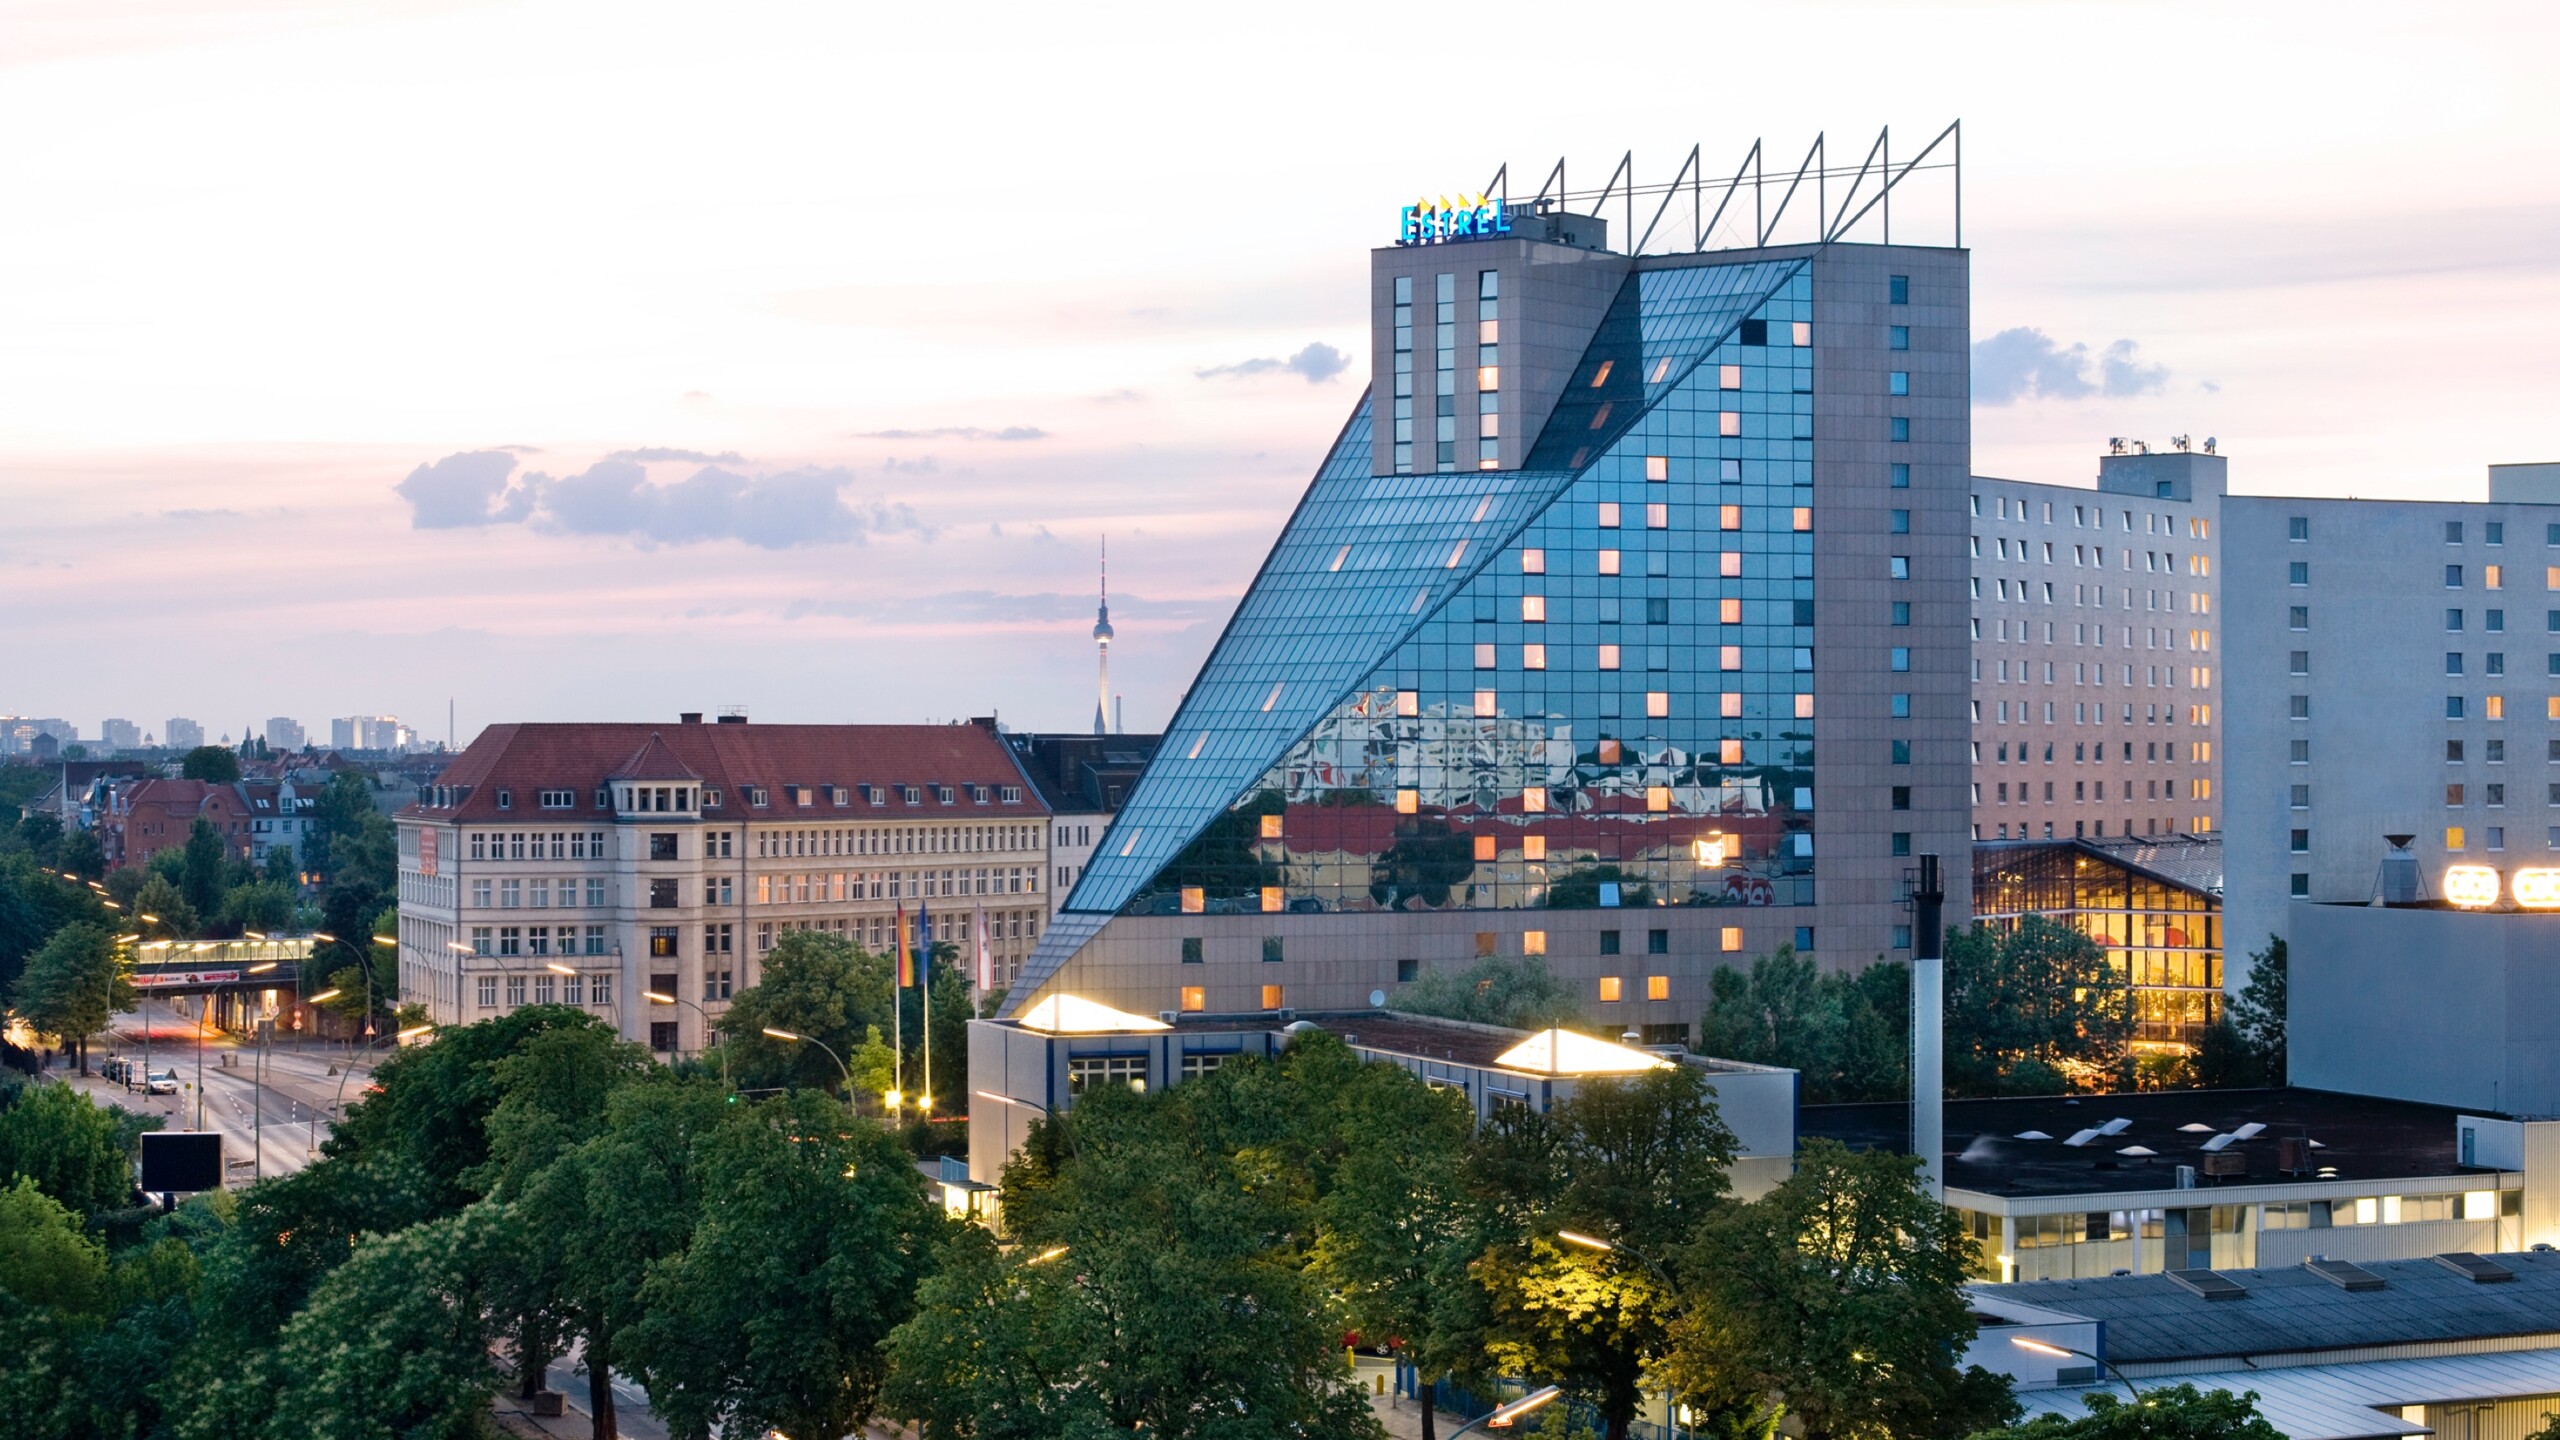 Exterior view of the Estrel Hotel Berlin during sunset